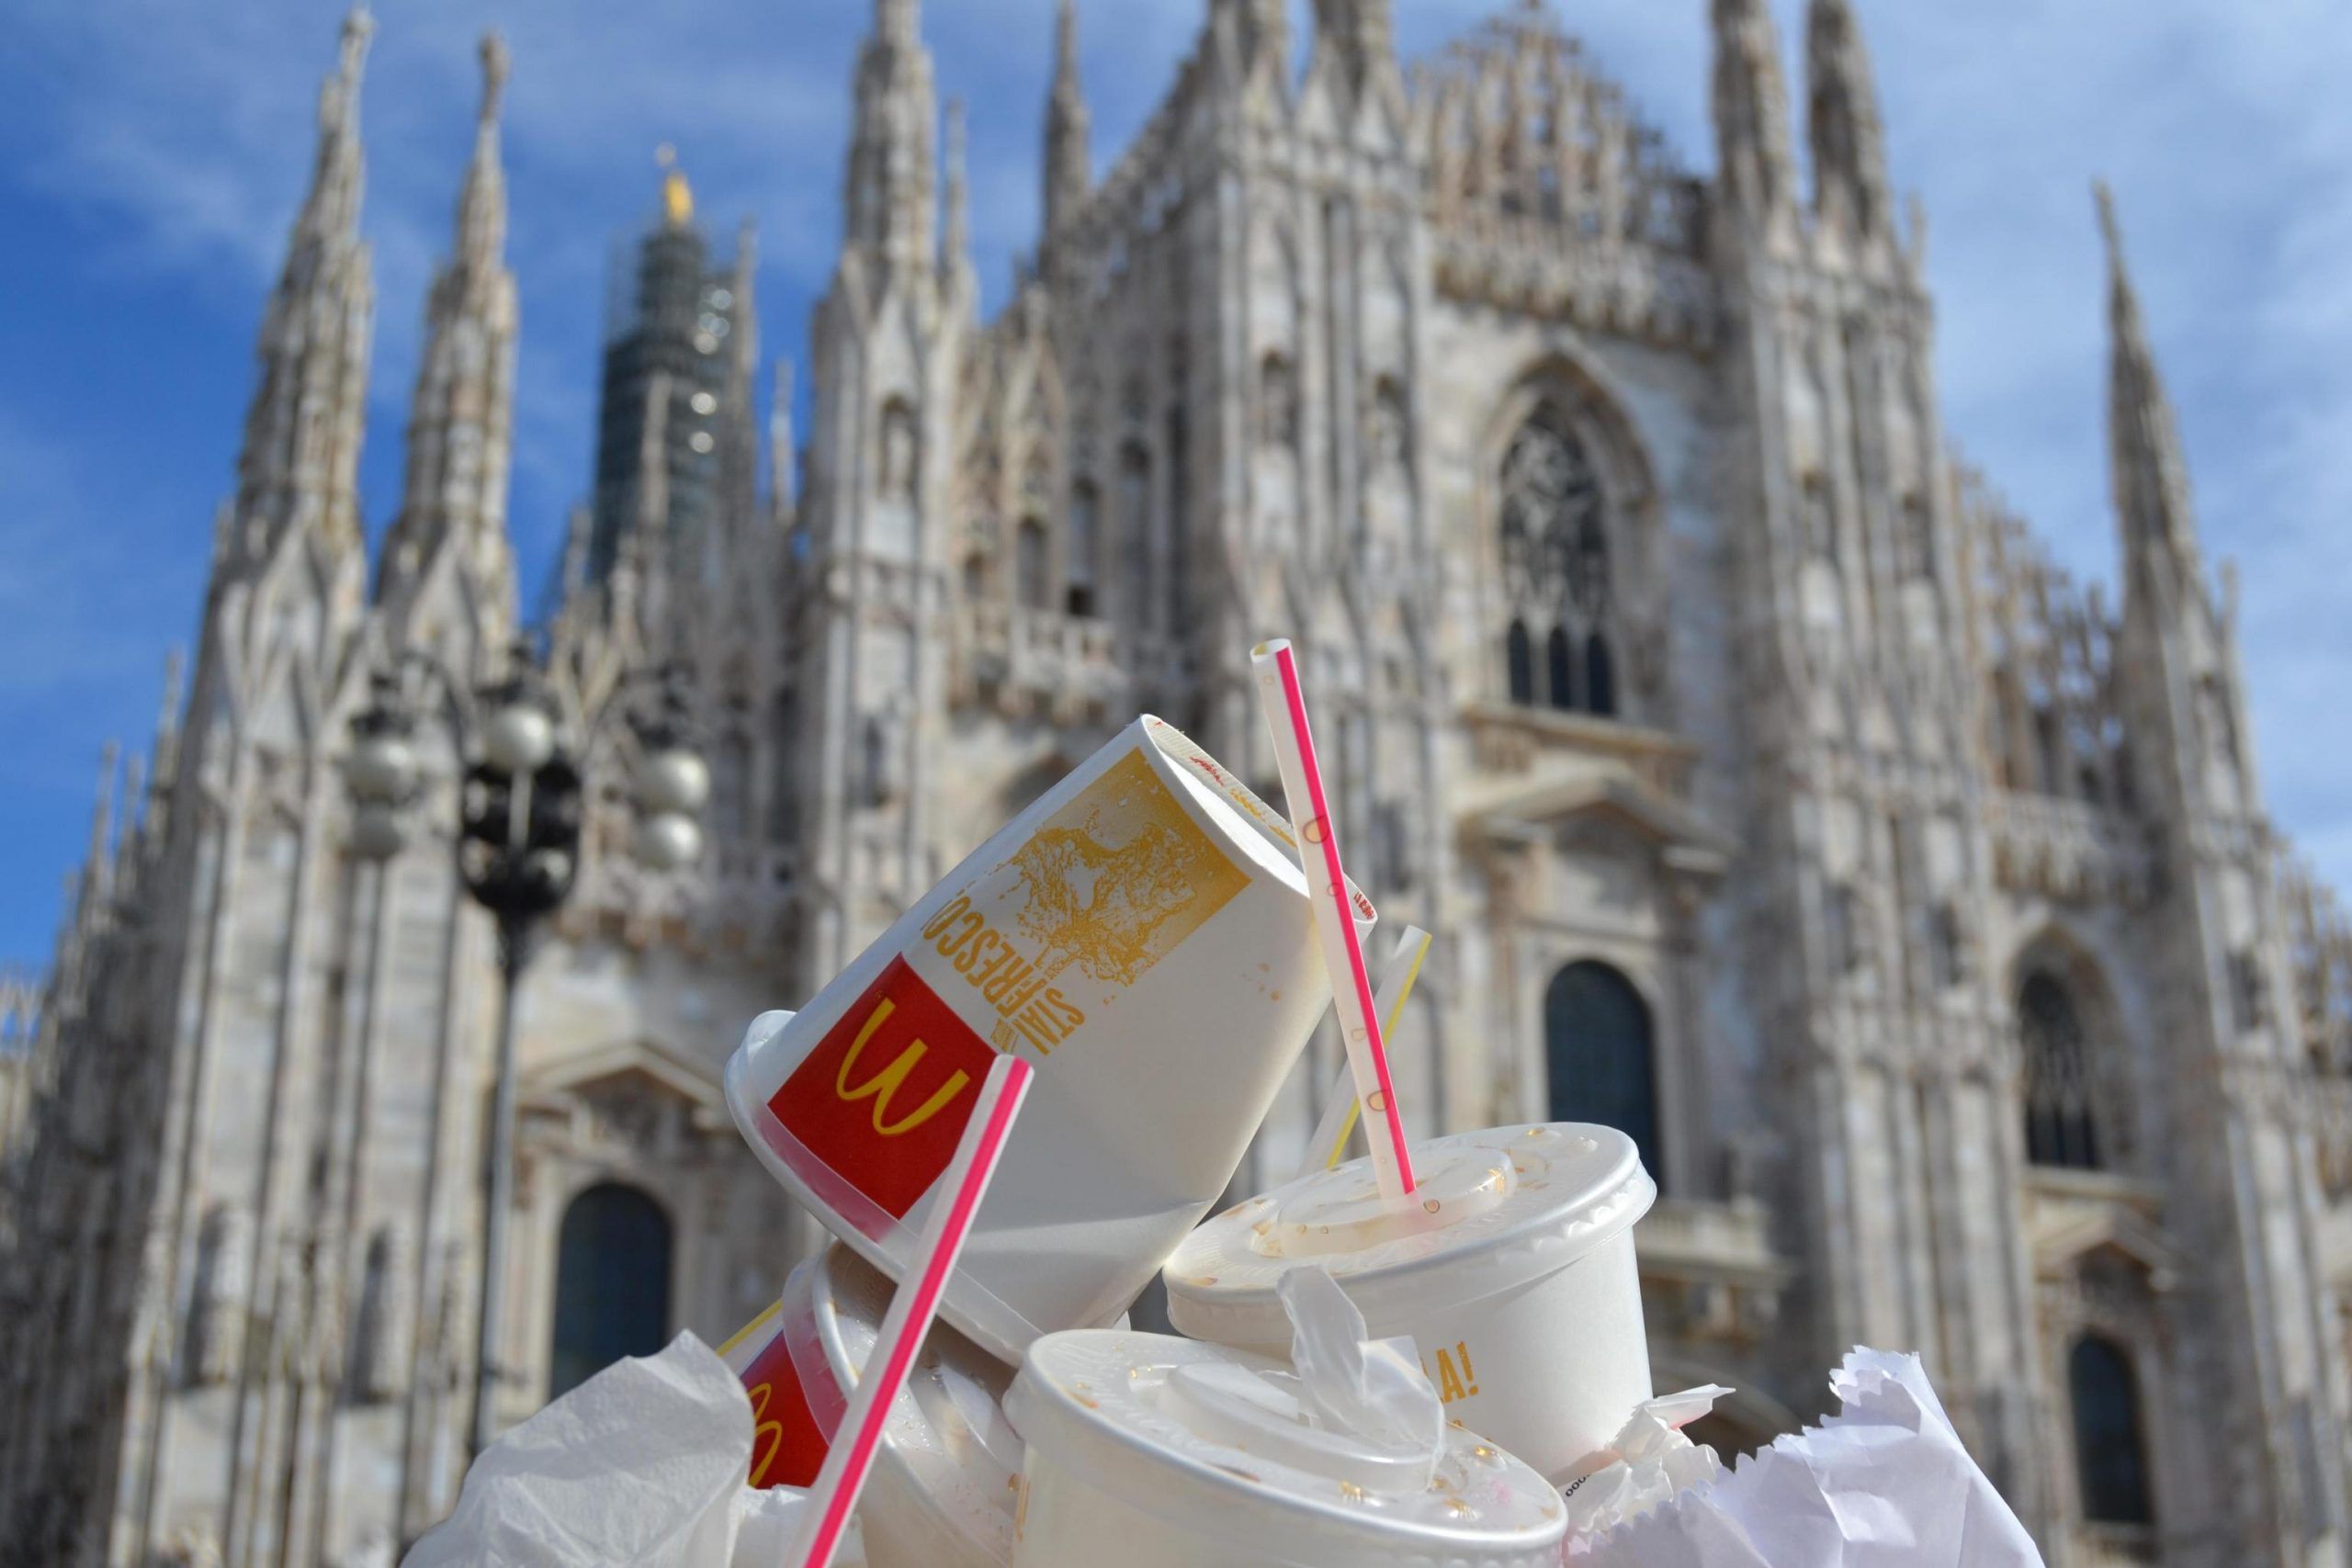 MC DONALD'S LAST DAY OF OPENING IN CENTRE OF MILAN